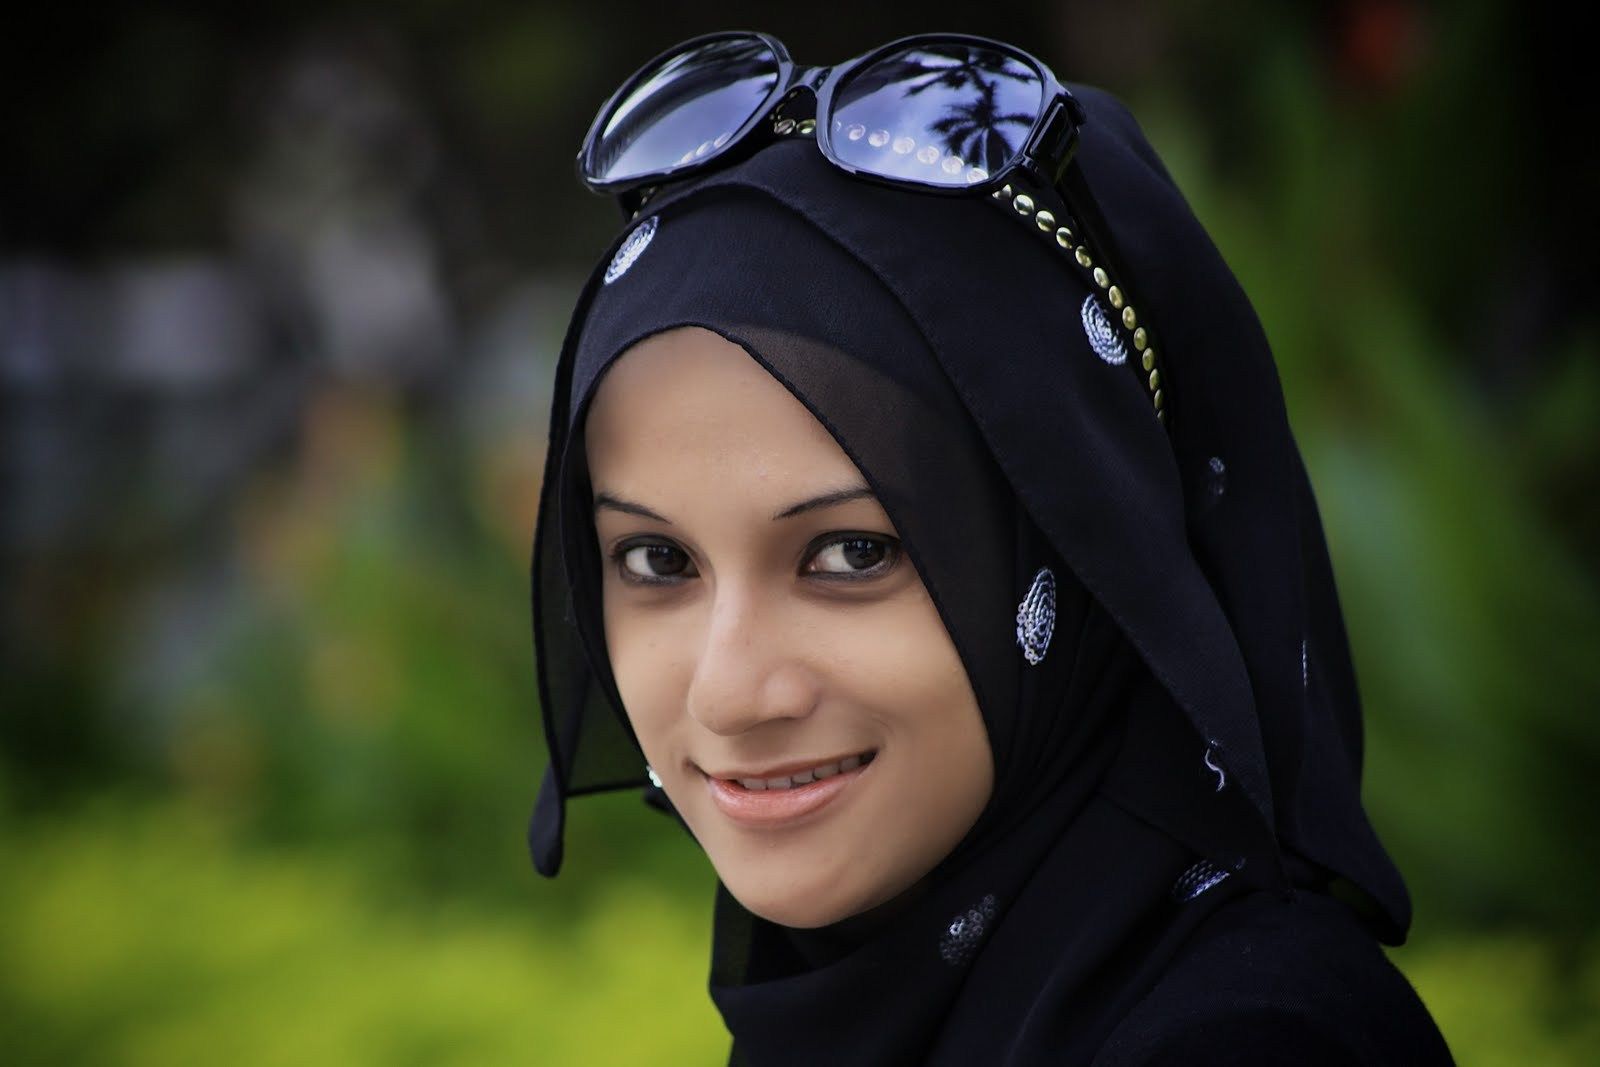 The Muslim Girl who Ranks Among The world's Most Famous Faces, see.